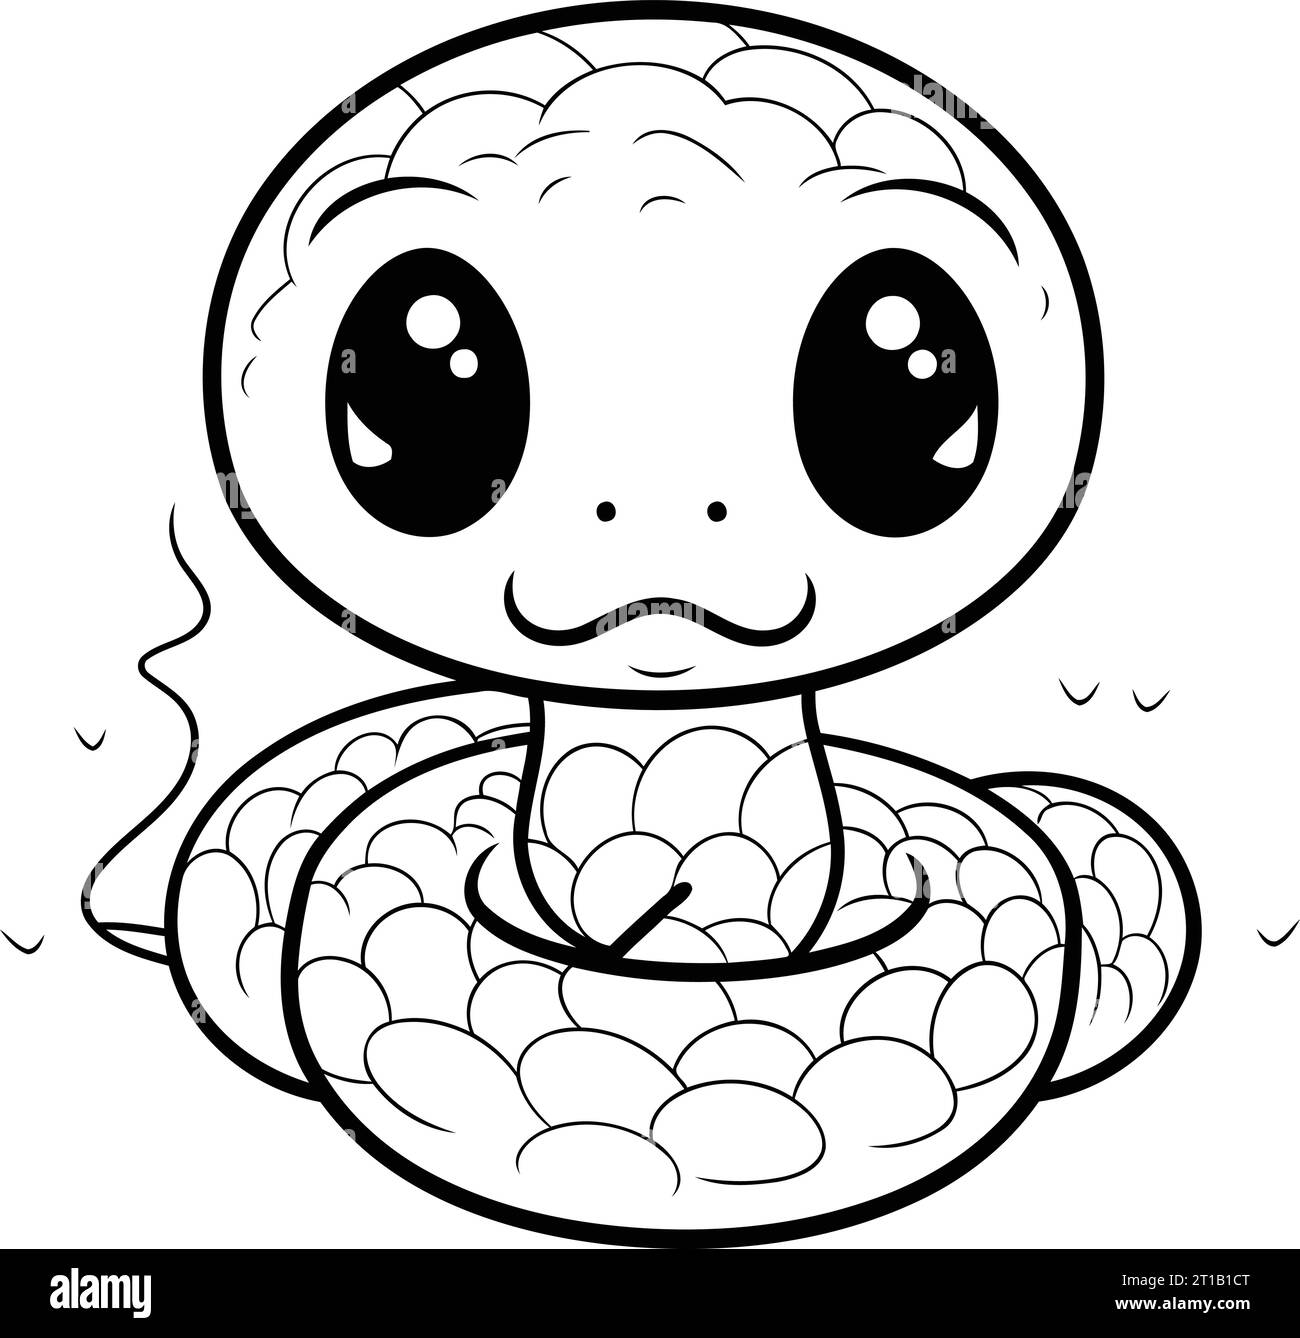 Snake coloring book for adults Royalty Free Vector Image